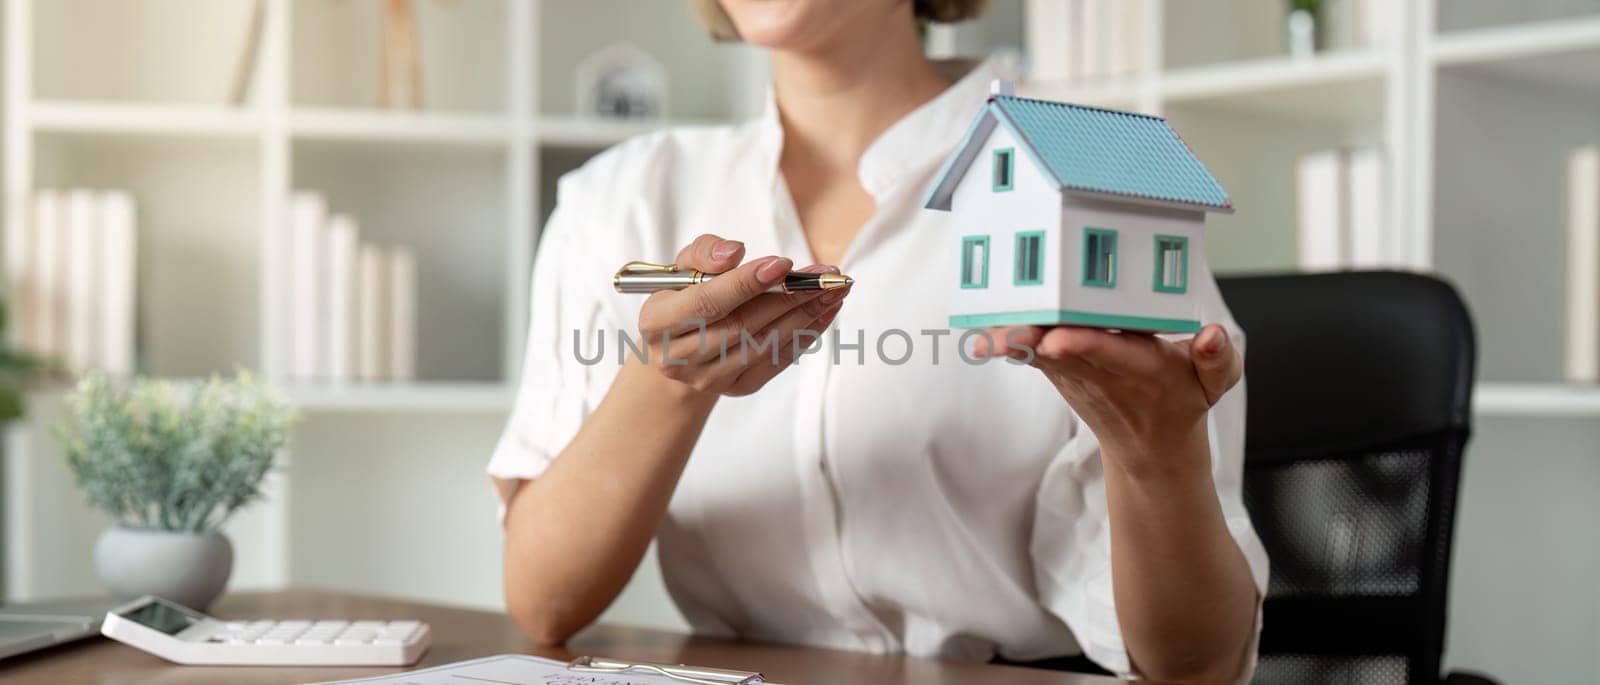 Home sale and home insurance concept, real estate agent with house model talking to client about buy home insurance and client signing contract under formal contract agreement by nateemee